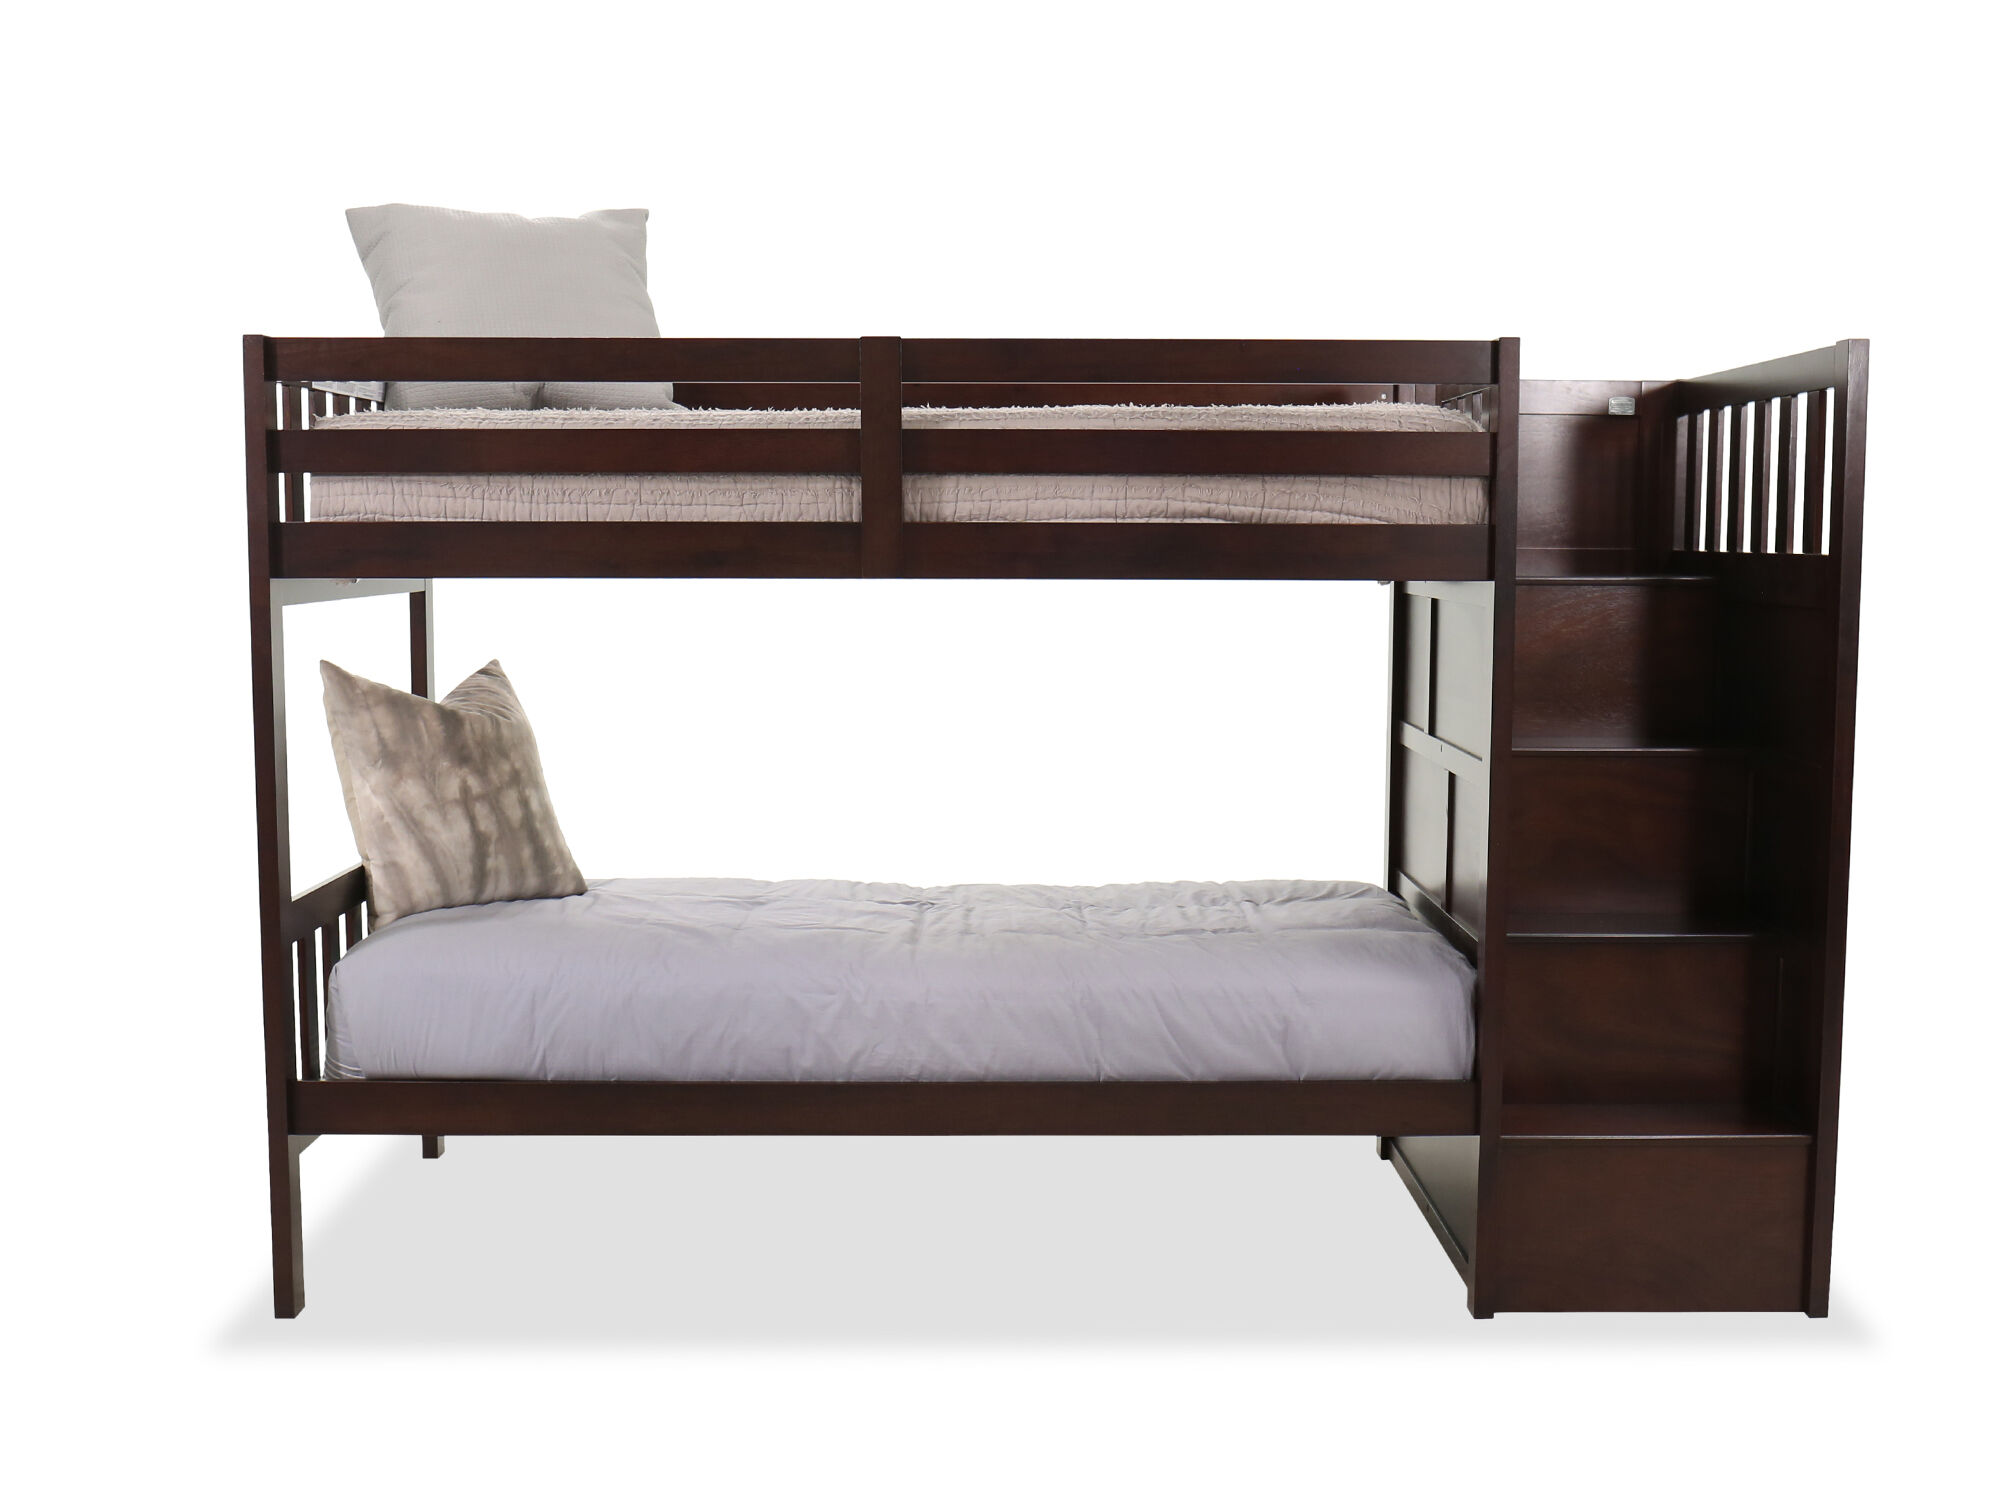 mathis brothers twin beds